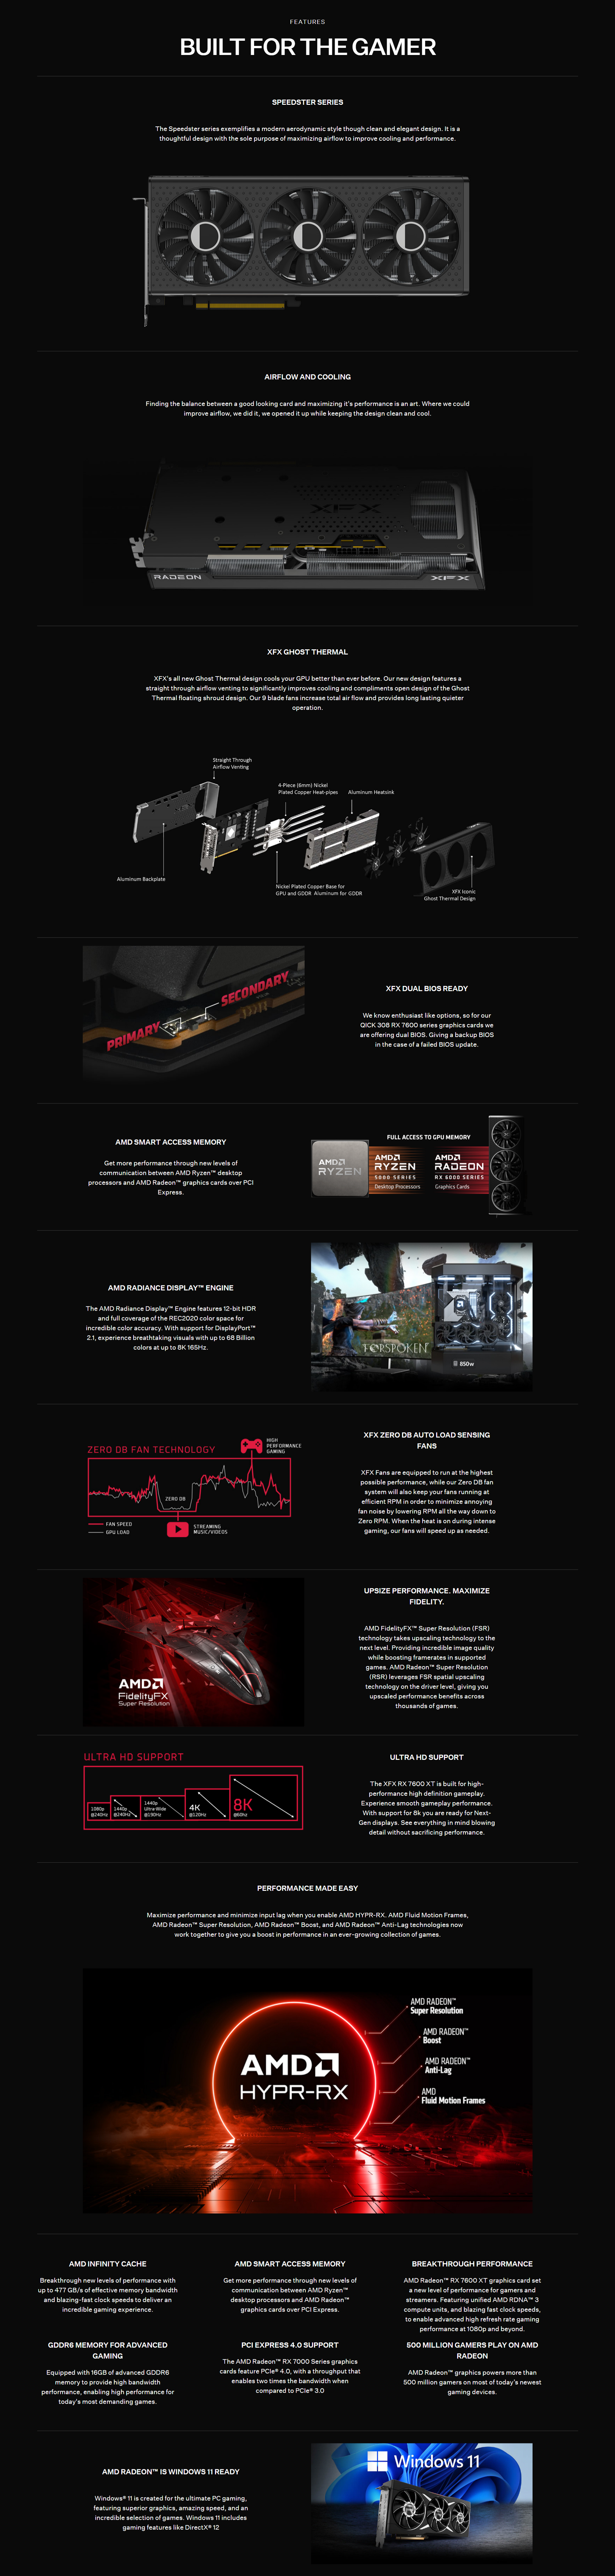 A large marketing image providing additional information about the product XFX Radeon RX 7600 XT Speedster QICK309 16GB GDDR6 - Additional alt info not provided